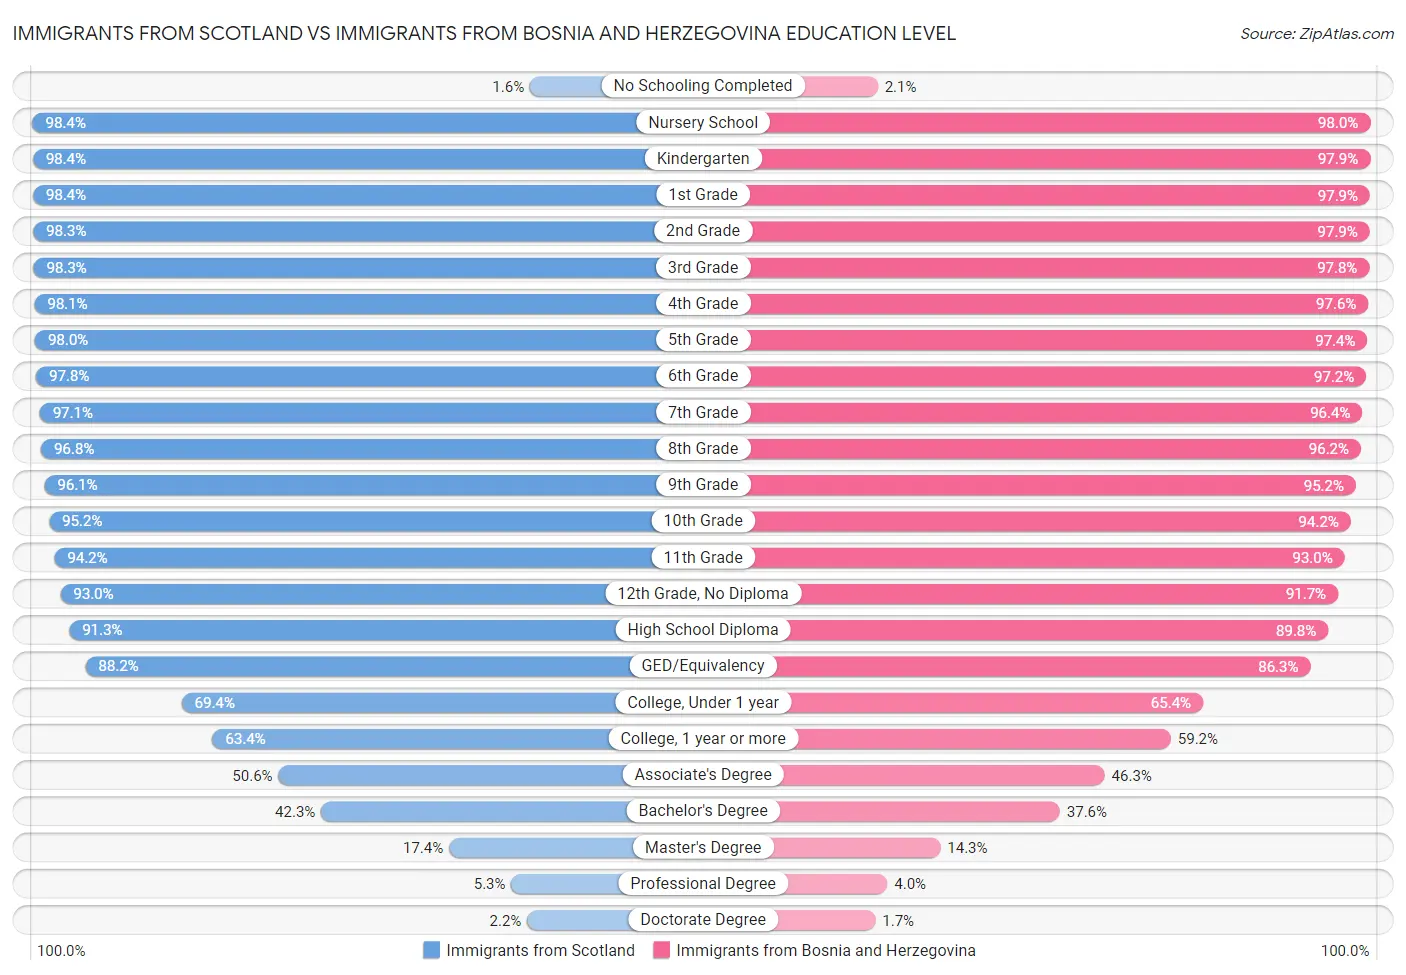 Immigrants from Scotland vs Immigrants from Bosnia and Herzegovina Education Level